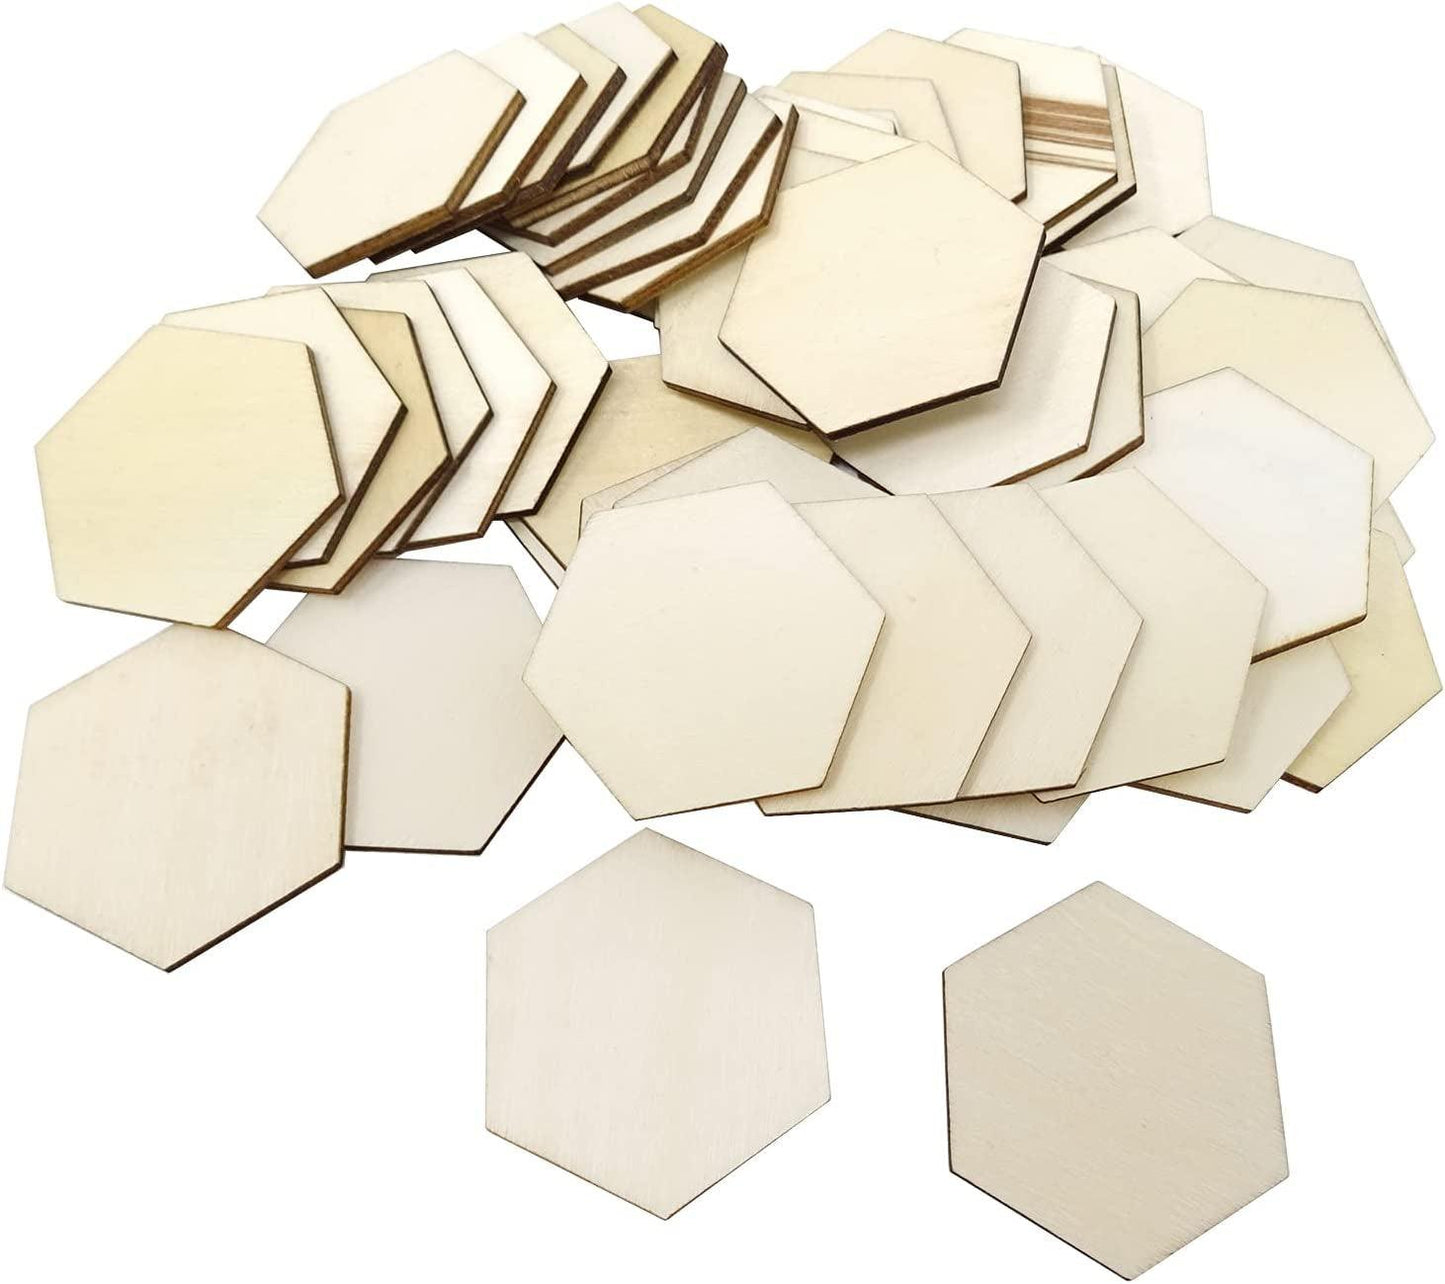 50PCS 50Mm/2Inch Hexagon Blank Unfinished Wood Slices for DIY Crafts, Home Decoration, Games - WoodArtSupply